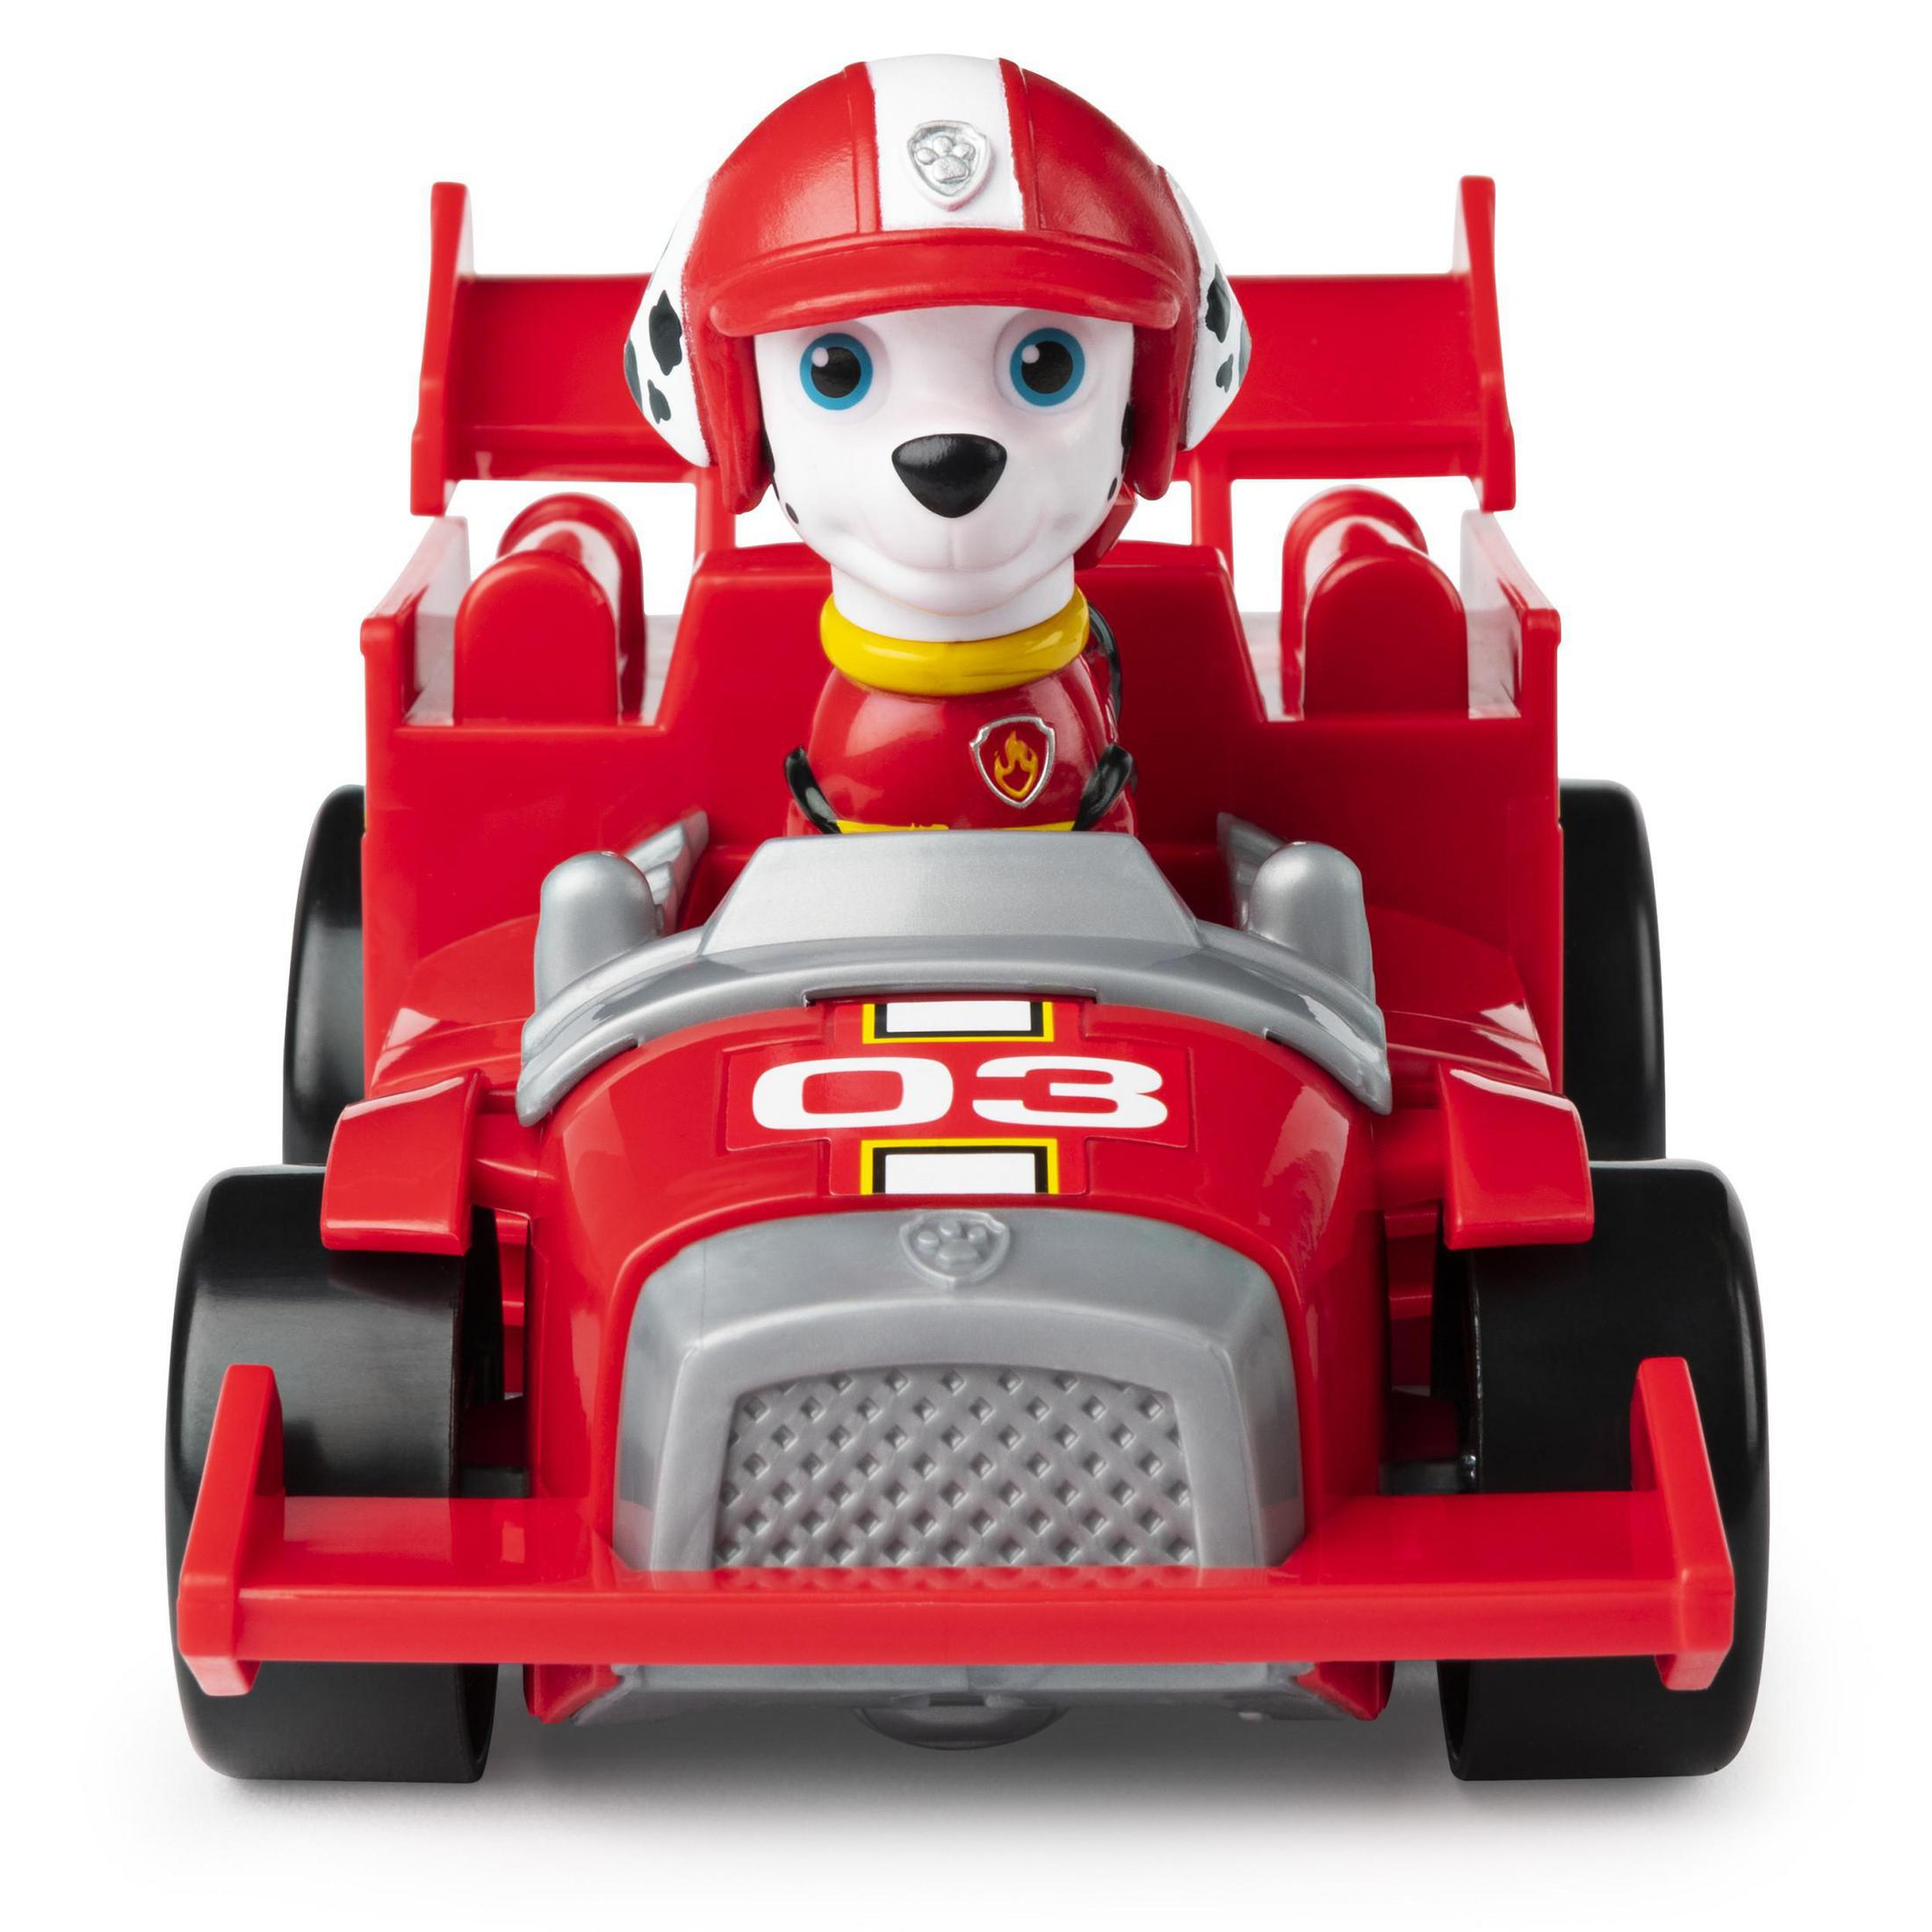 THEMED Mehrfarbig Spielset VEHICLE 28190 SPIN MARSHALL MASTER PAW R,R,R